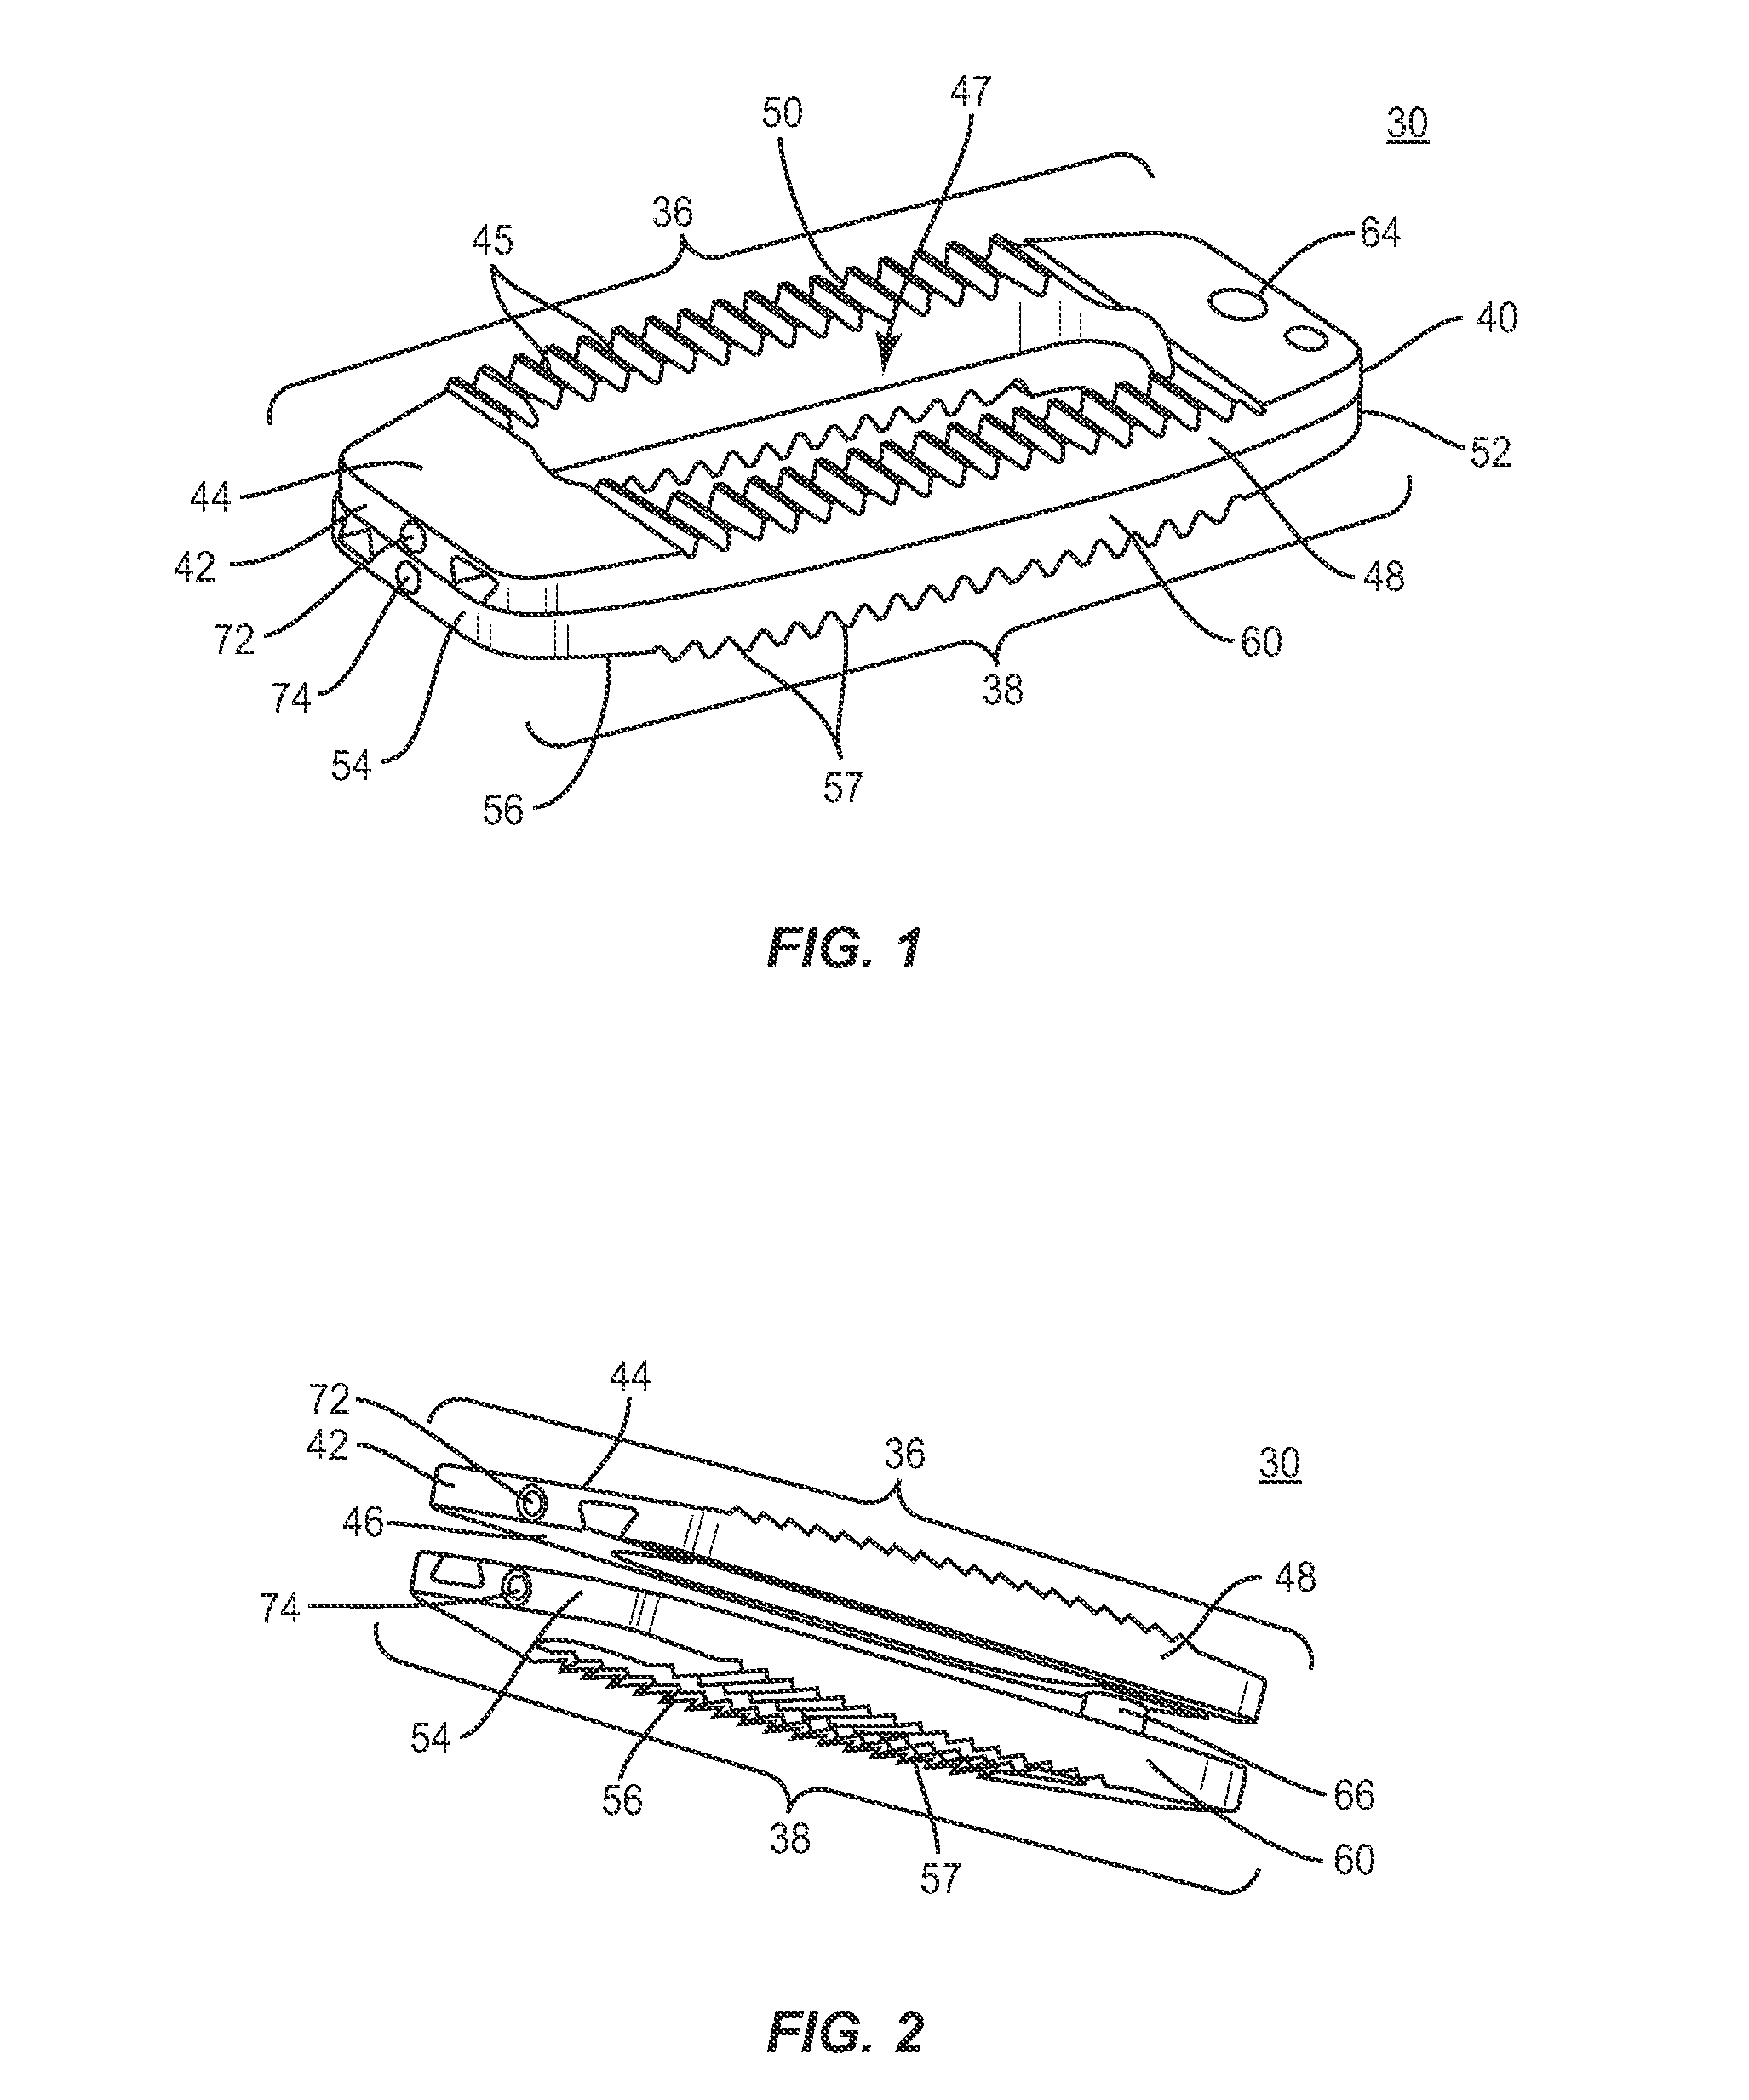 Interbody implant system and methods of use